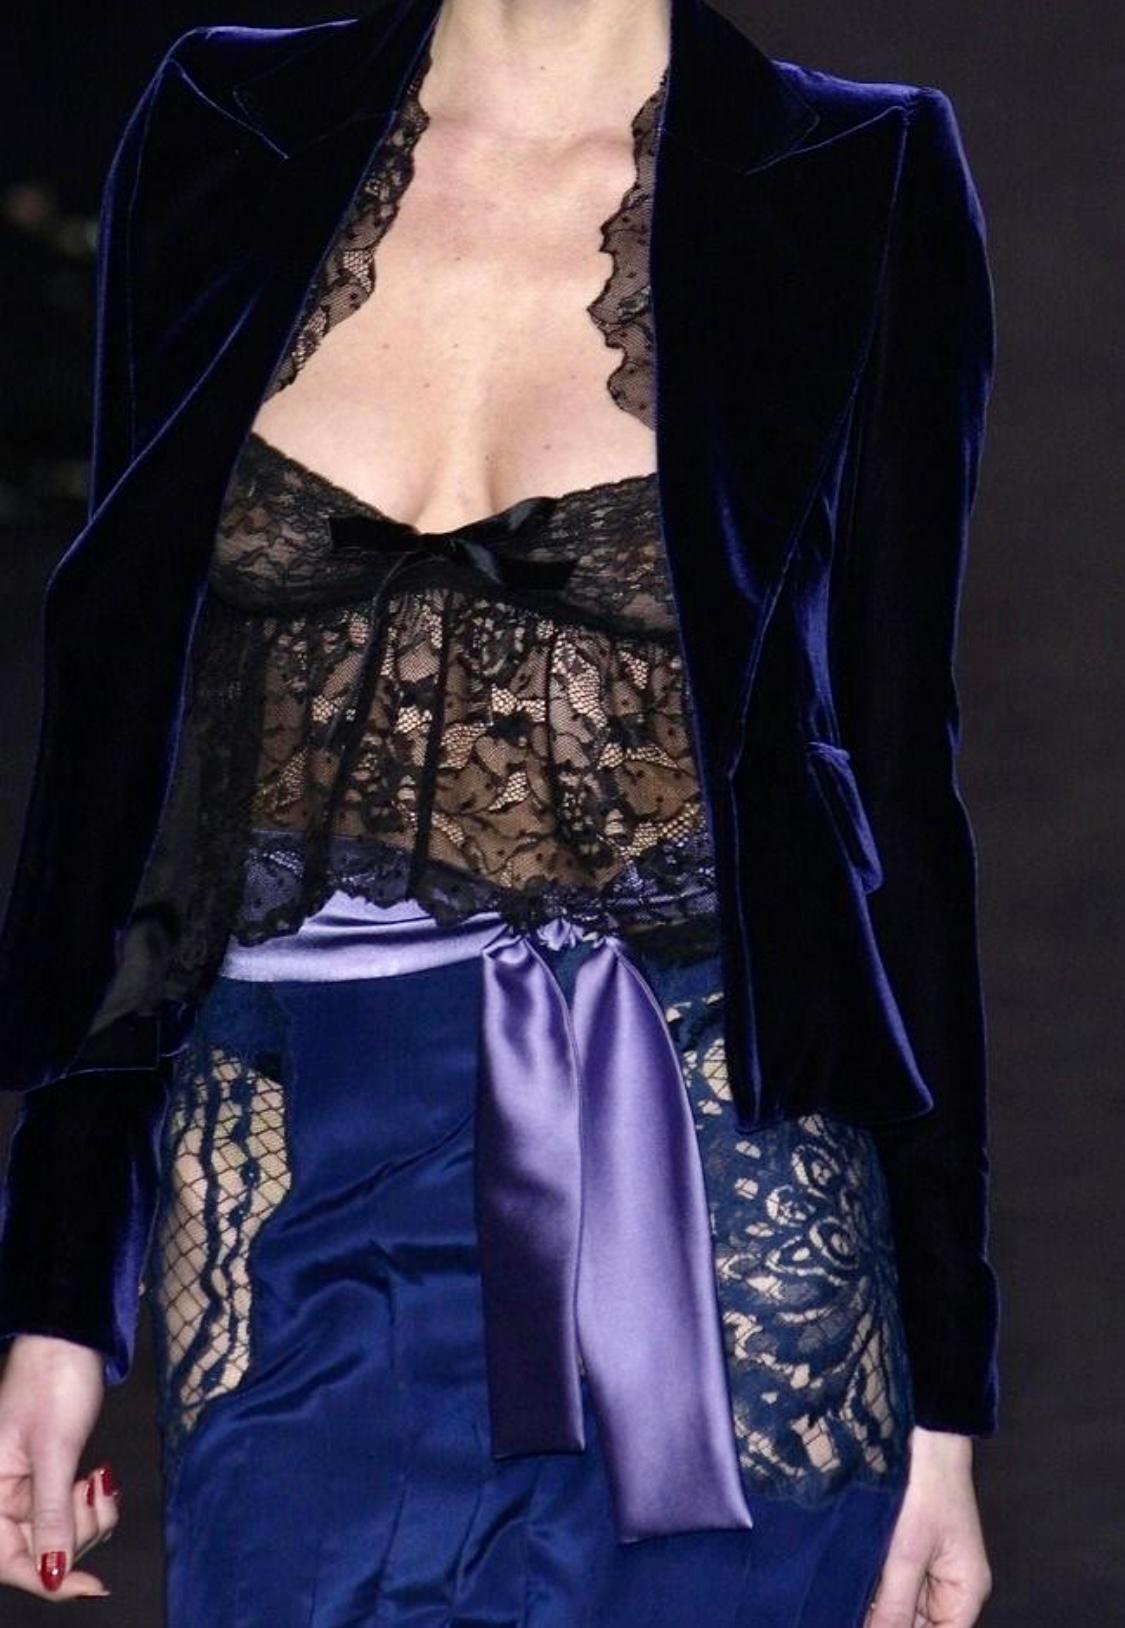 Presenting a fabulous sheer lace Yves Saint Laurent Rive Gauche top and skirt set, designed by Tom Ford. From the Fall/Winter 2003 Diana Ross inspired collection, these pieces debuted on the season's runway together worn as part of look 7, modeled